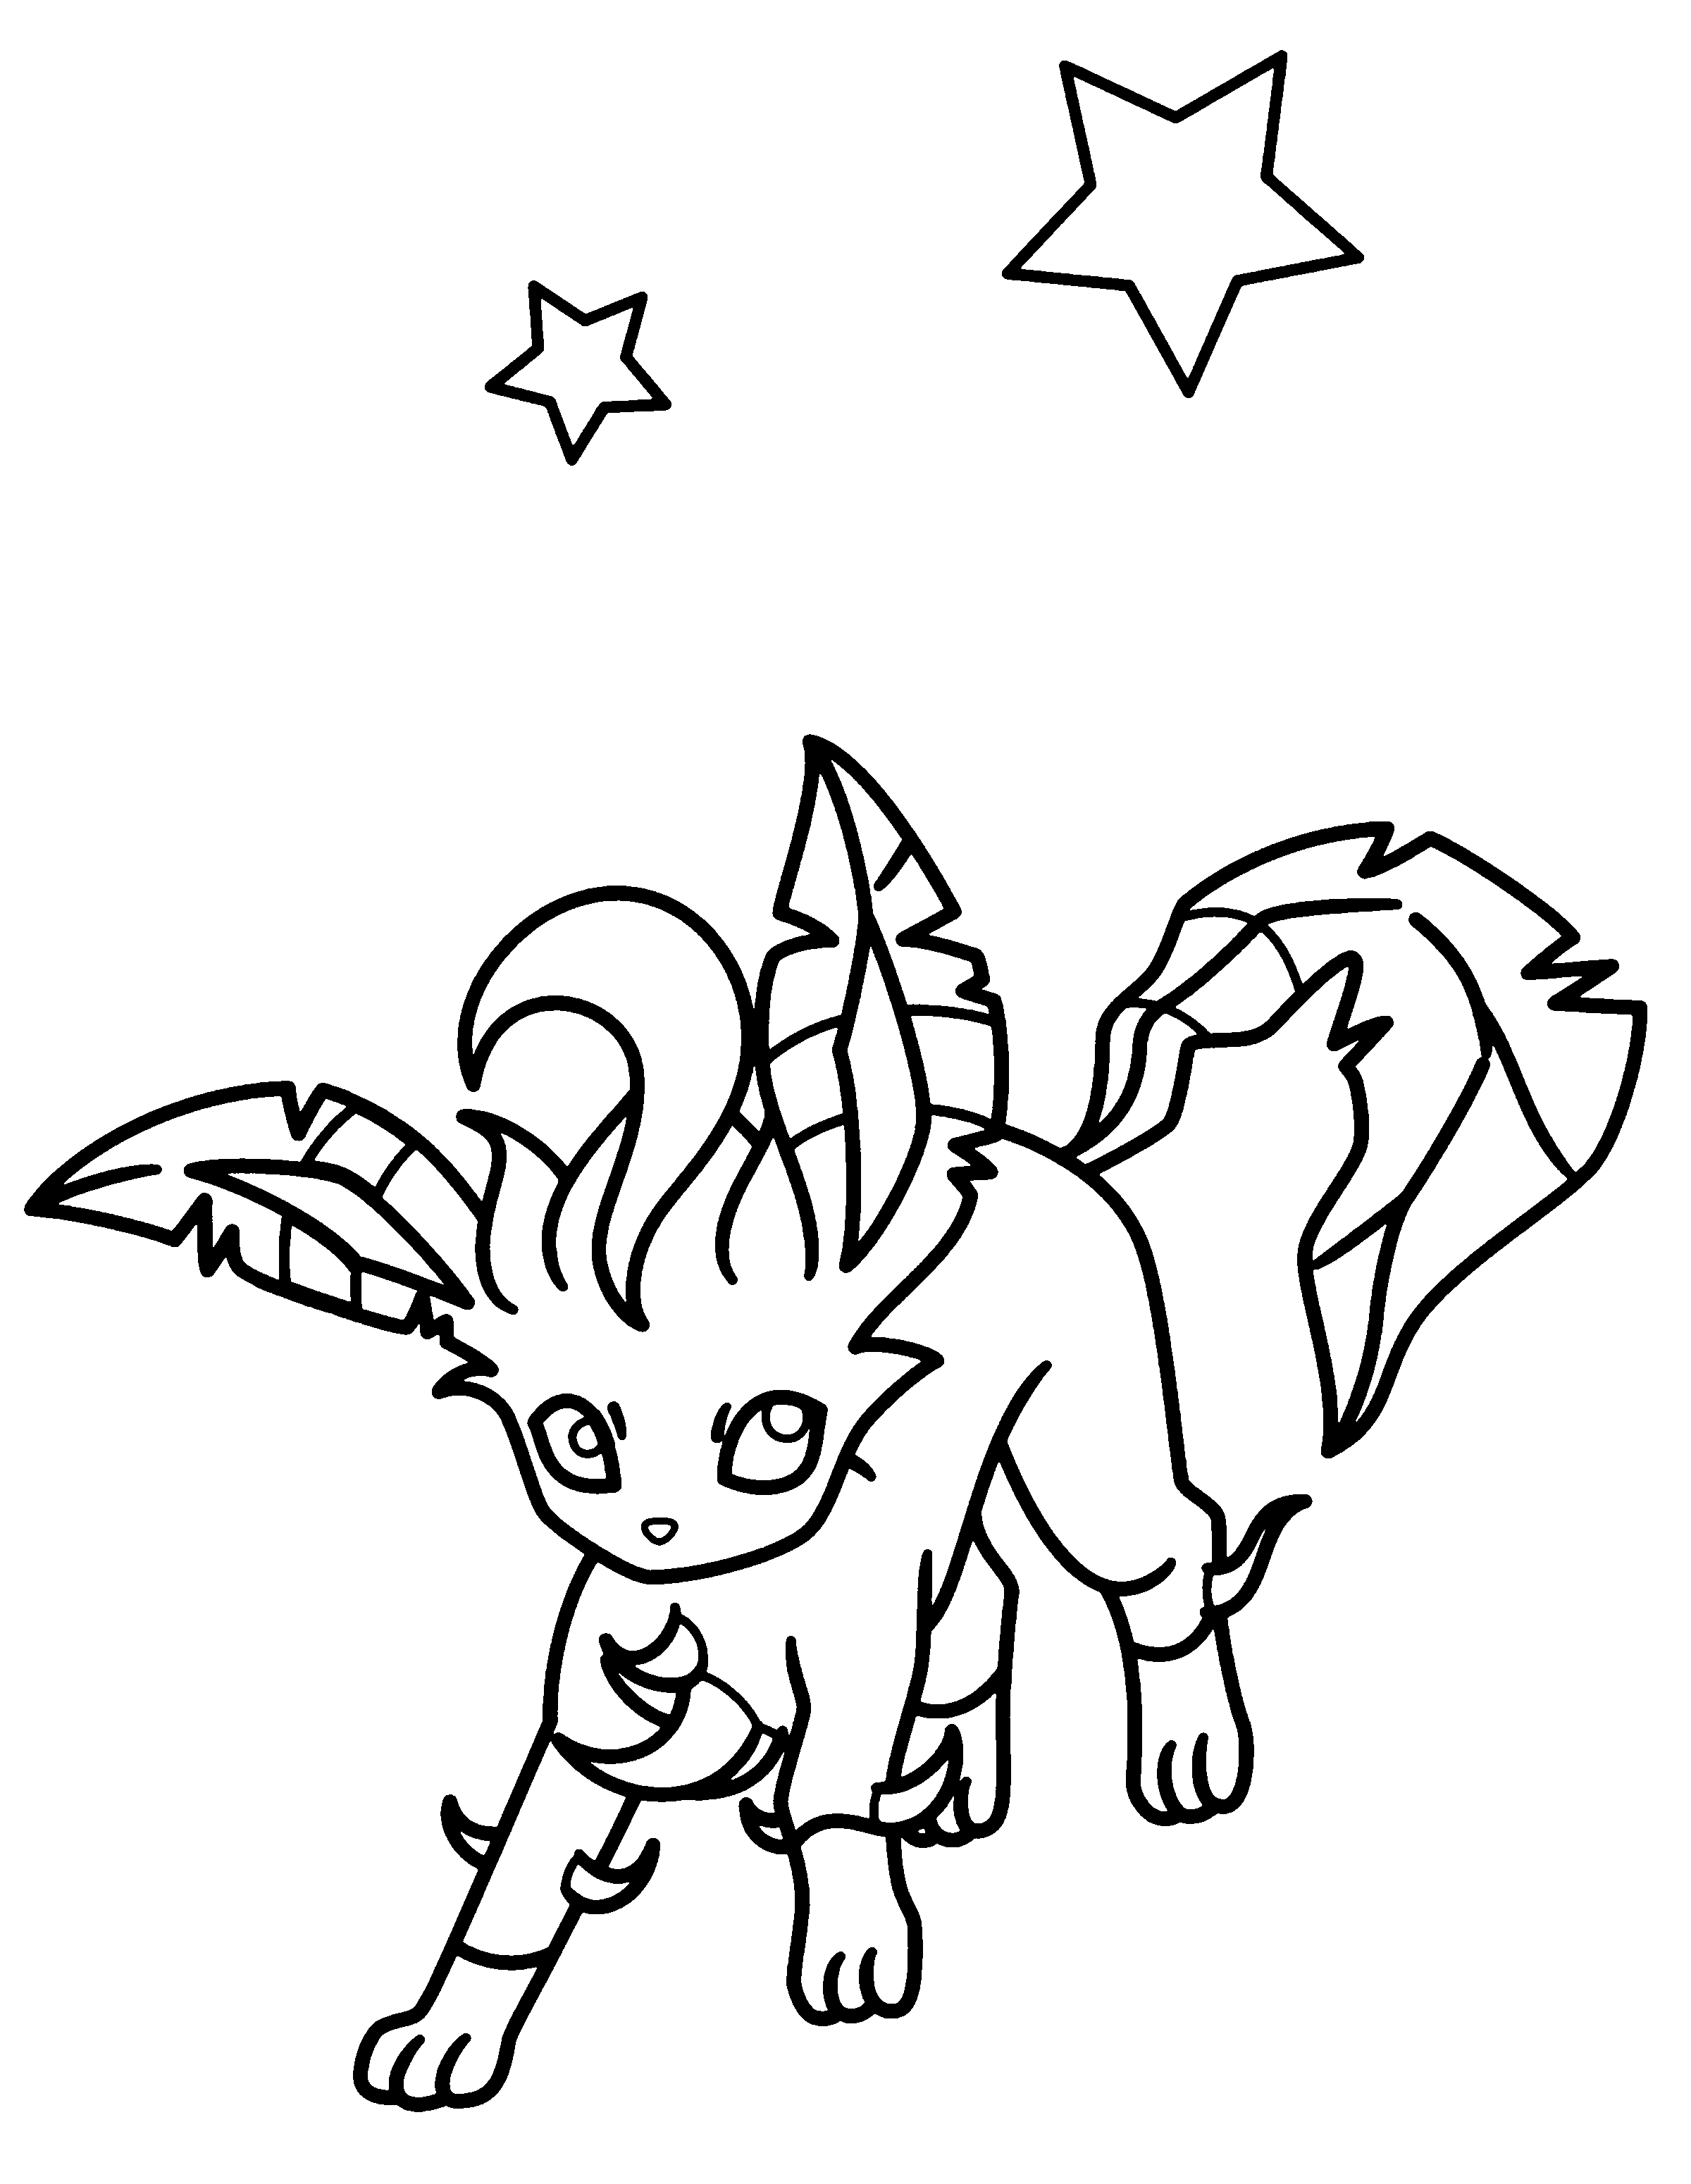 Pokemon diamond pearl Coloring Pages